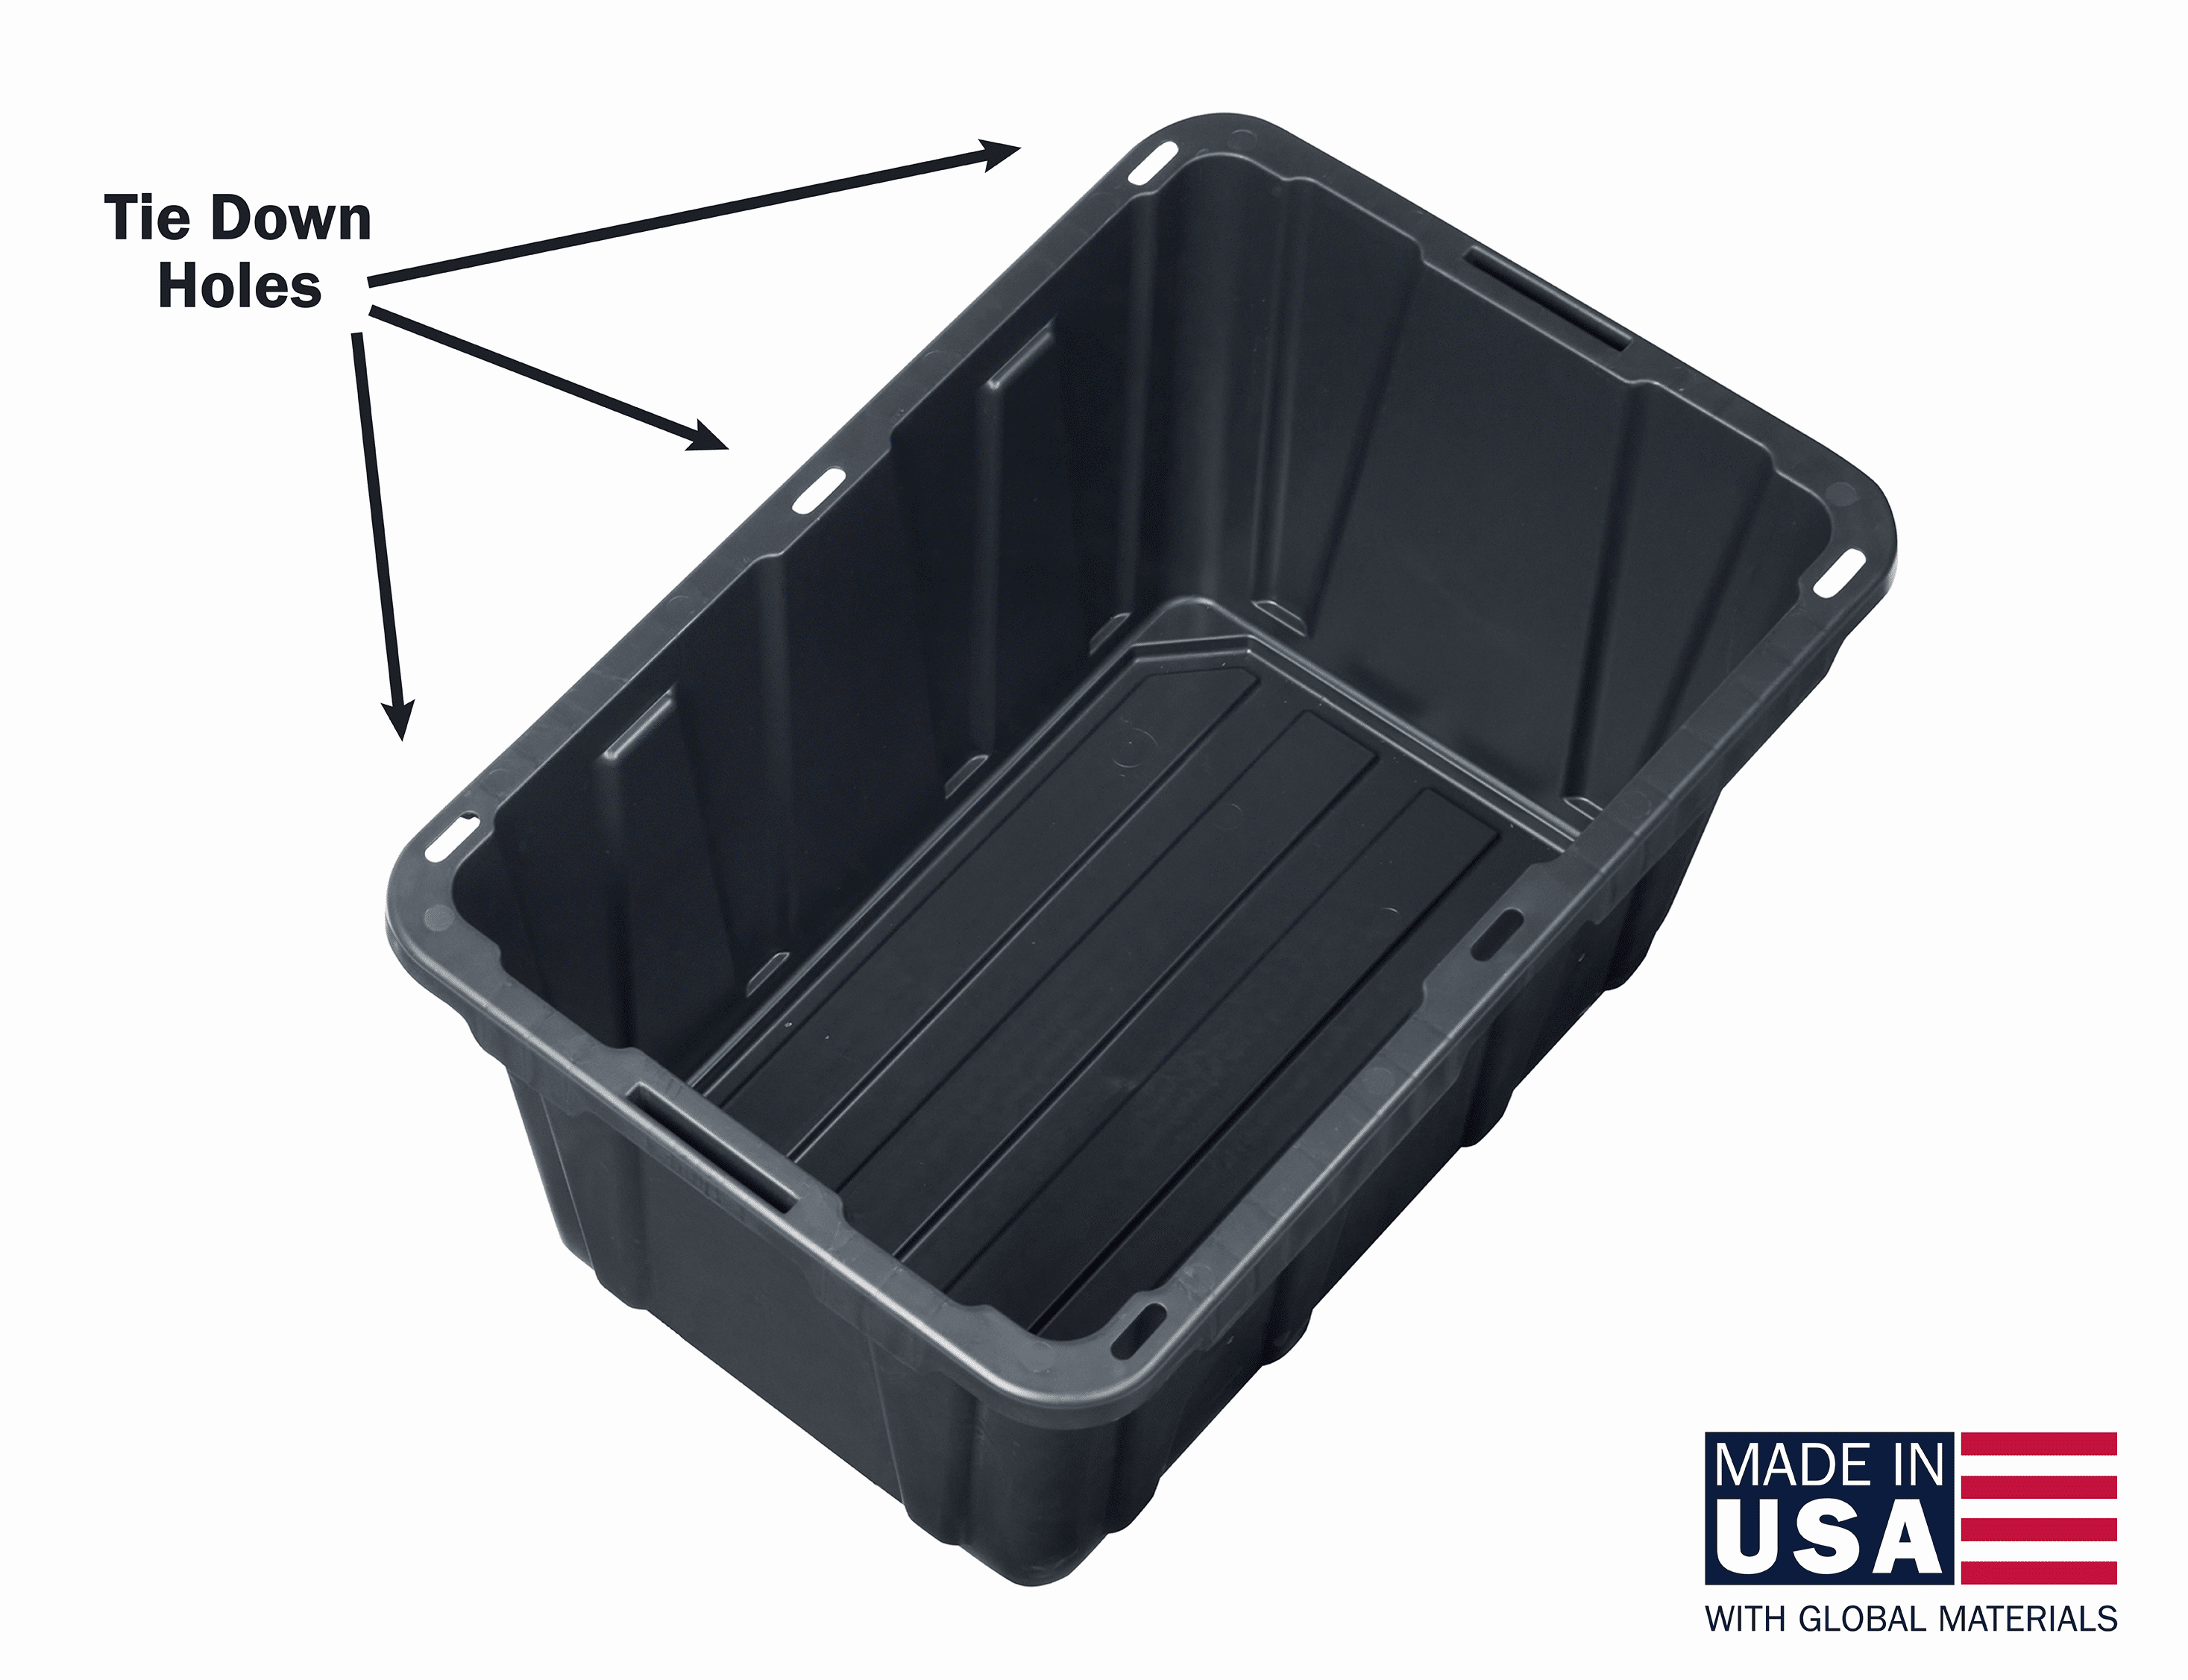 Universal 27 Gallon Tough Tote Caddy - 2 pack